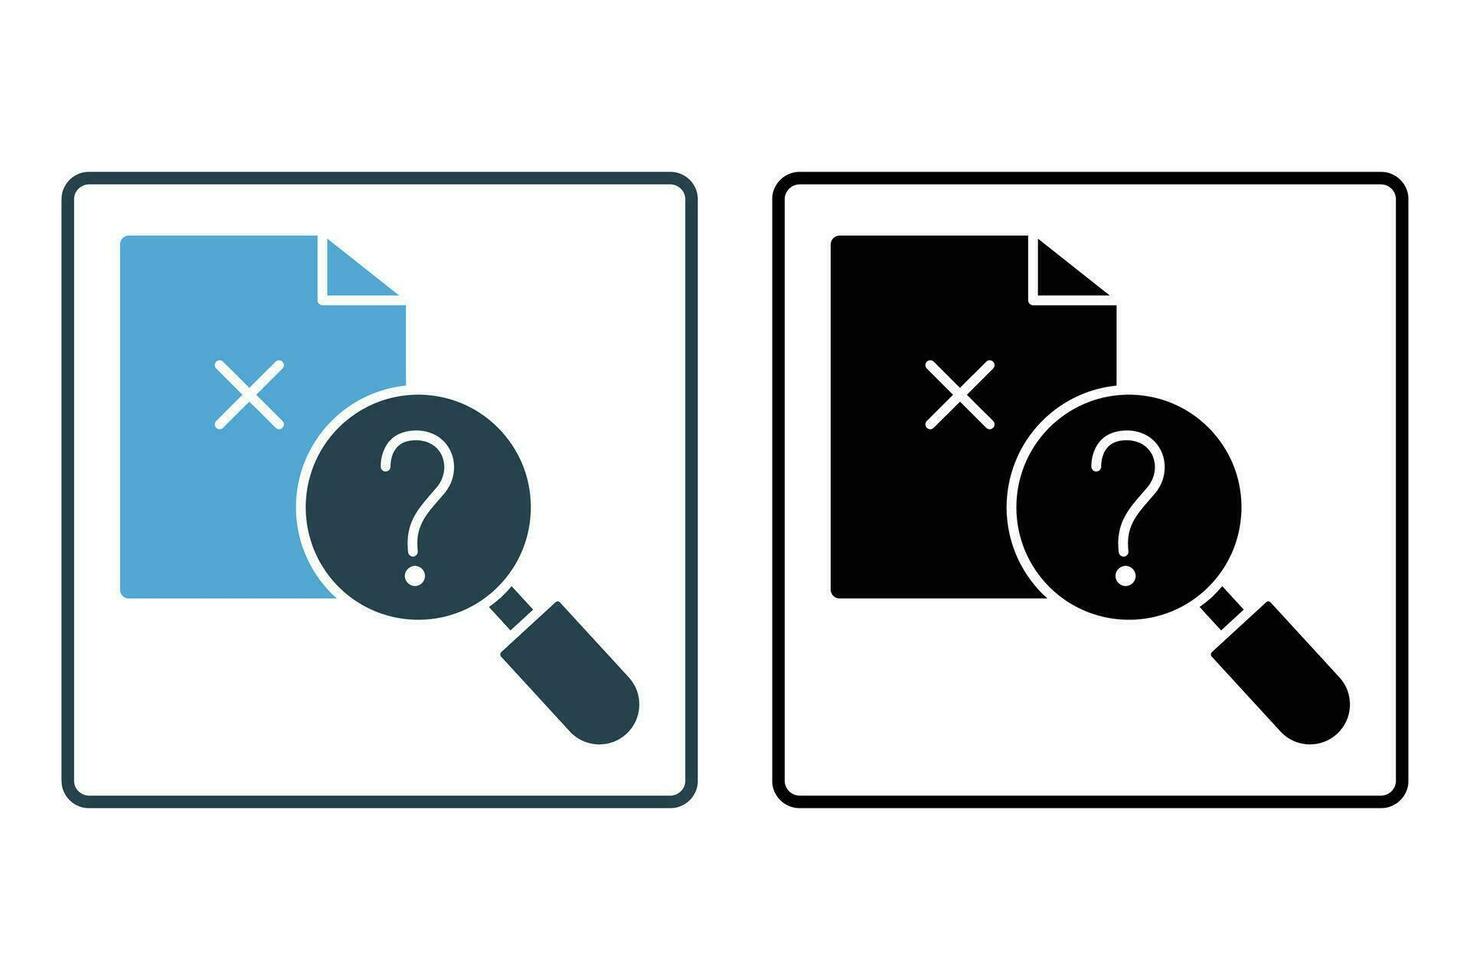 no result data icon. not found, magnifying glass with document. icon related to Find, Search. Solid icon style design. Simple vector design editable